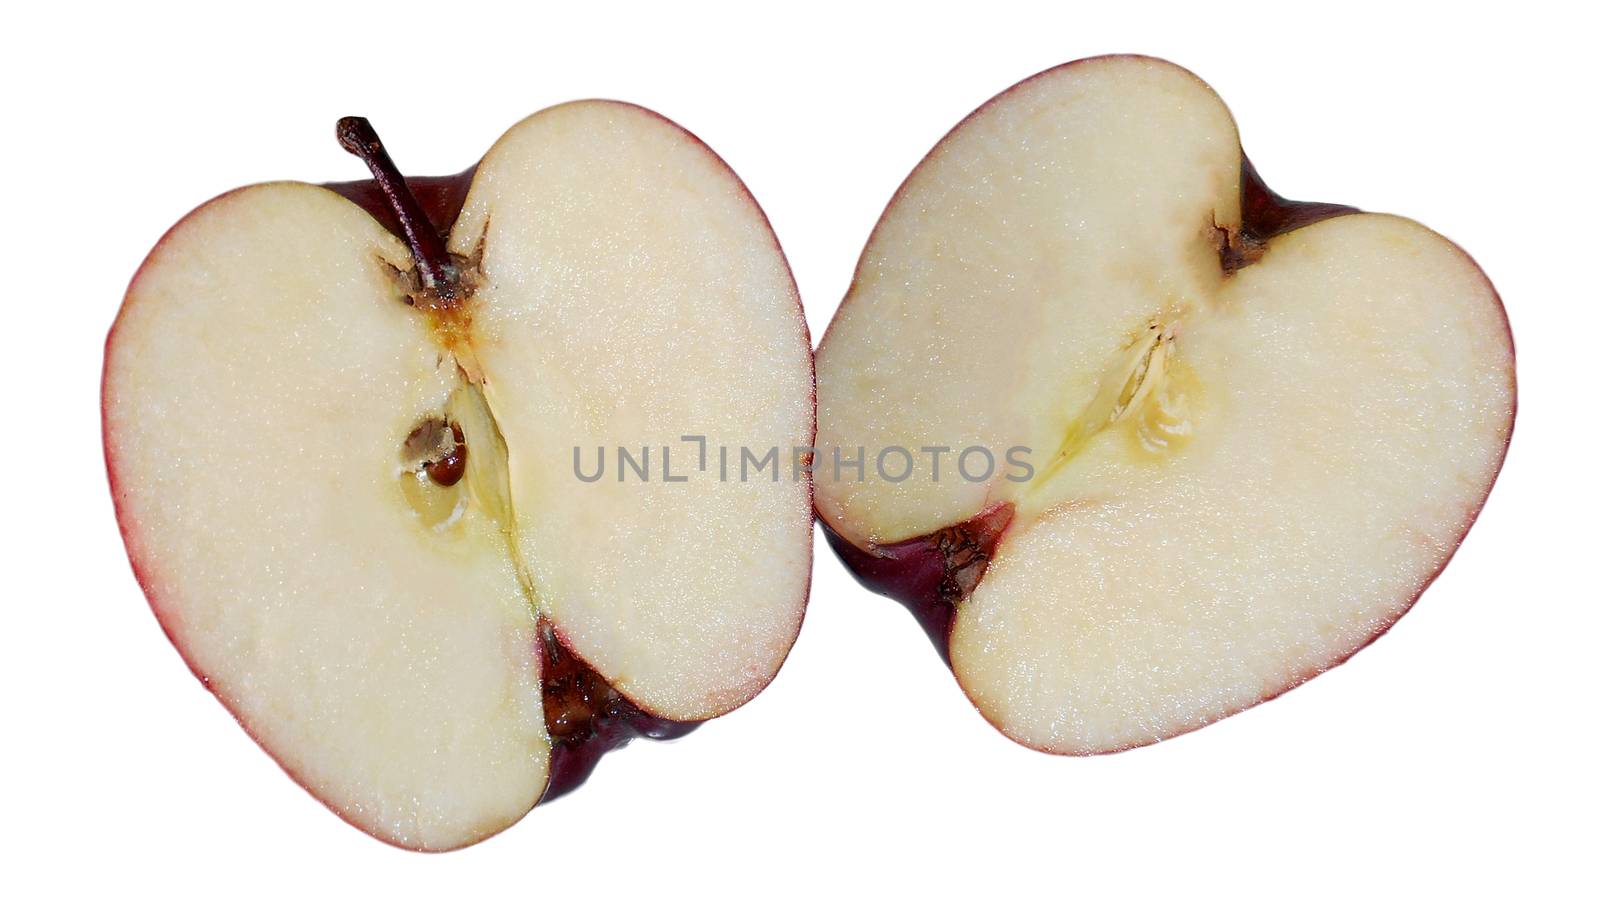 Two halves of an apple, isolated on white.

Picture taken on November 21, 2014.